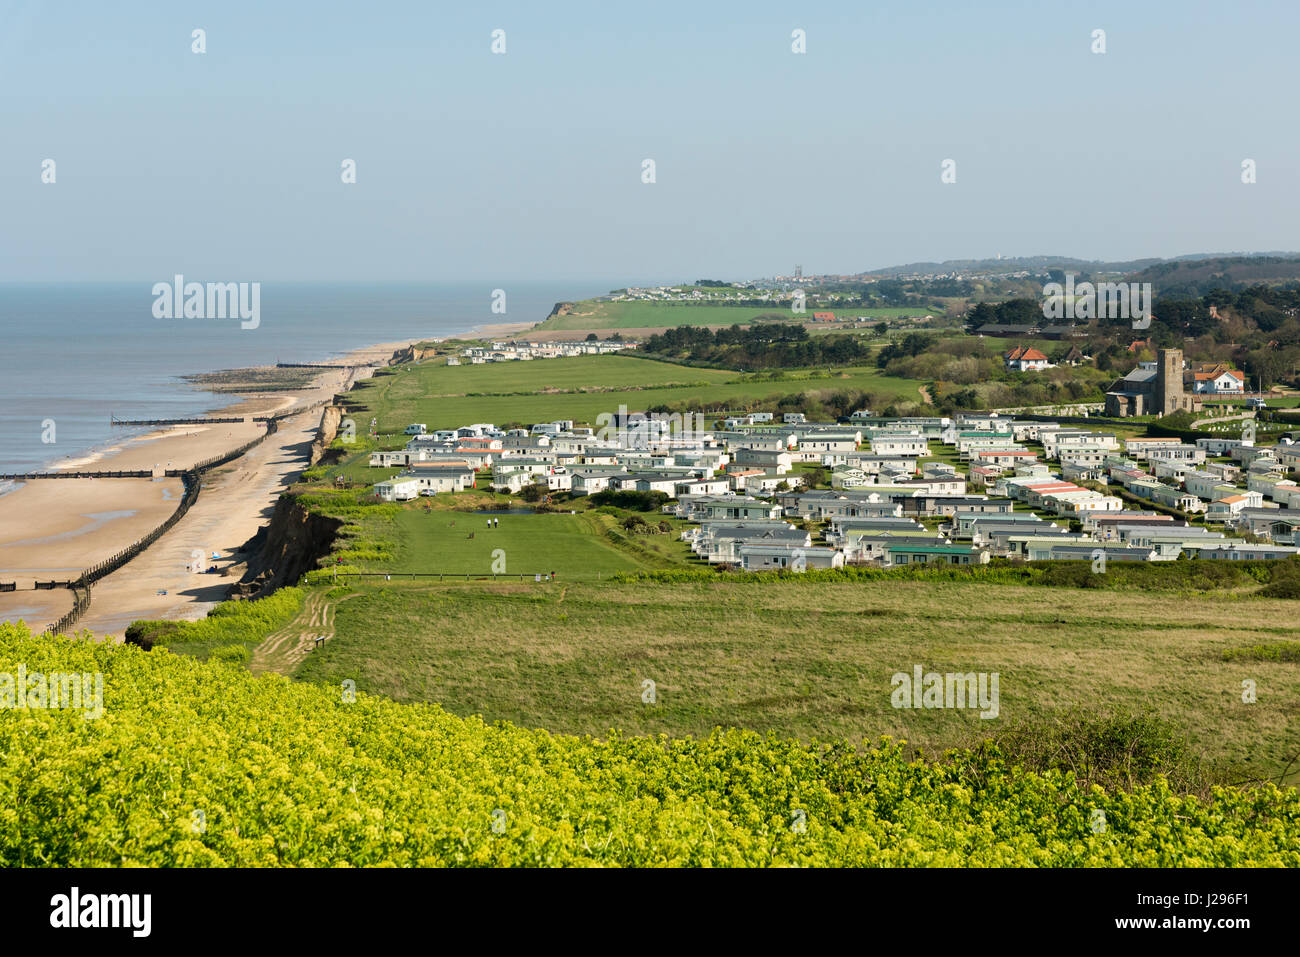 A landscape view of the Norfolk Coast UK at Beeston Regis showing a large static caravan or mobile home site Stock Photo